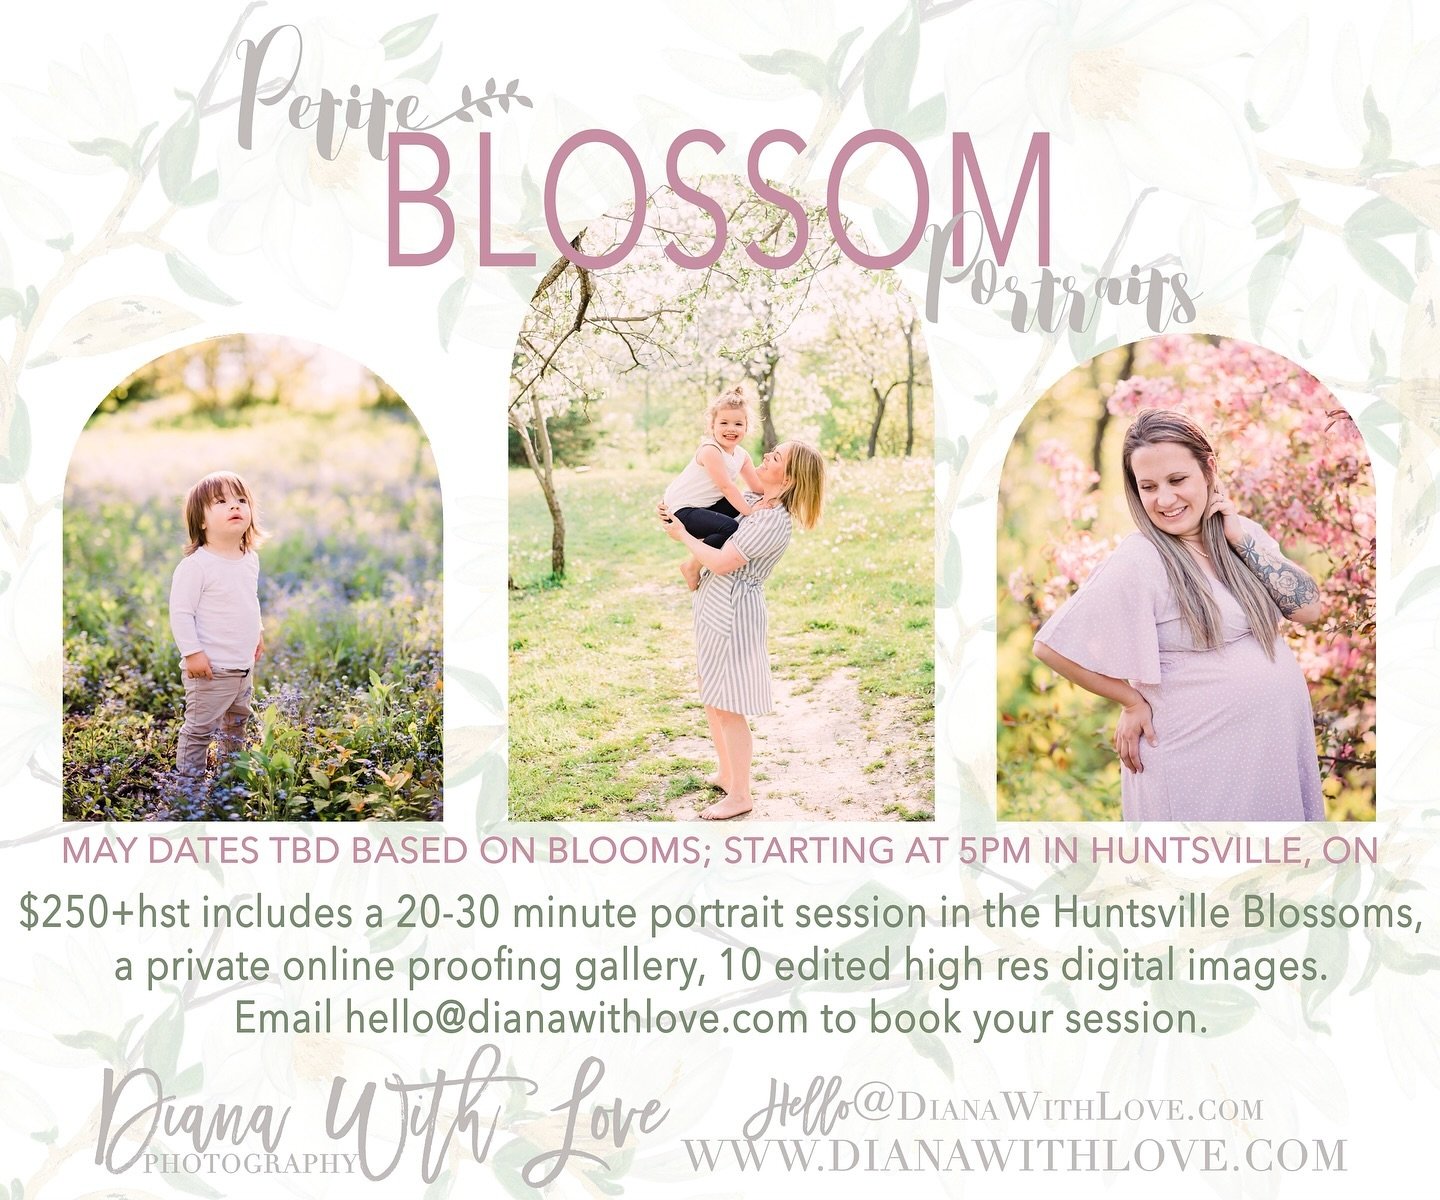 Now Booking Petite Blossom Portraits!  Super limited availability for Monday May 20th and Thursday May 23. Link in bio to book!

Blossom Report:
The forget me not field is looking stunning and full.  This year&rsquo;s blossoms are open and about 60-7